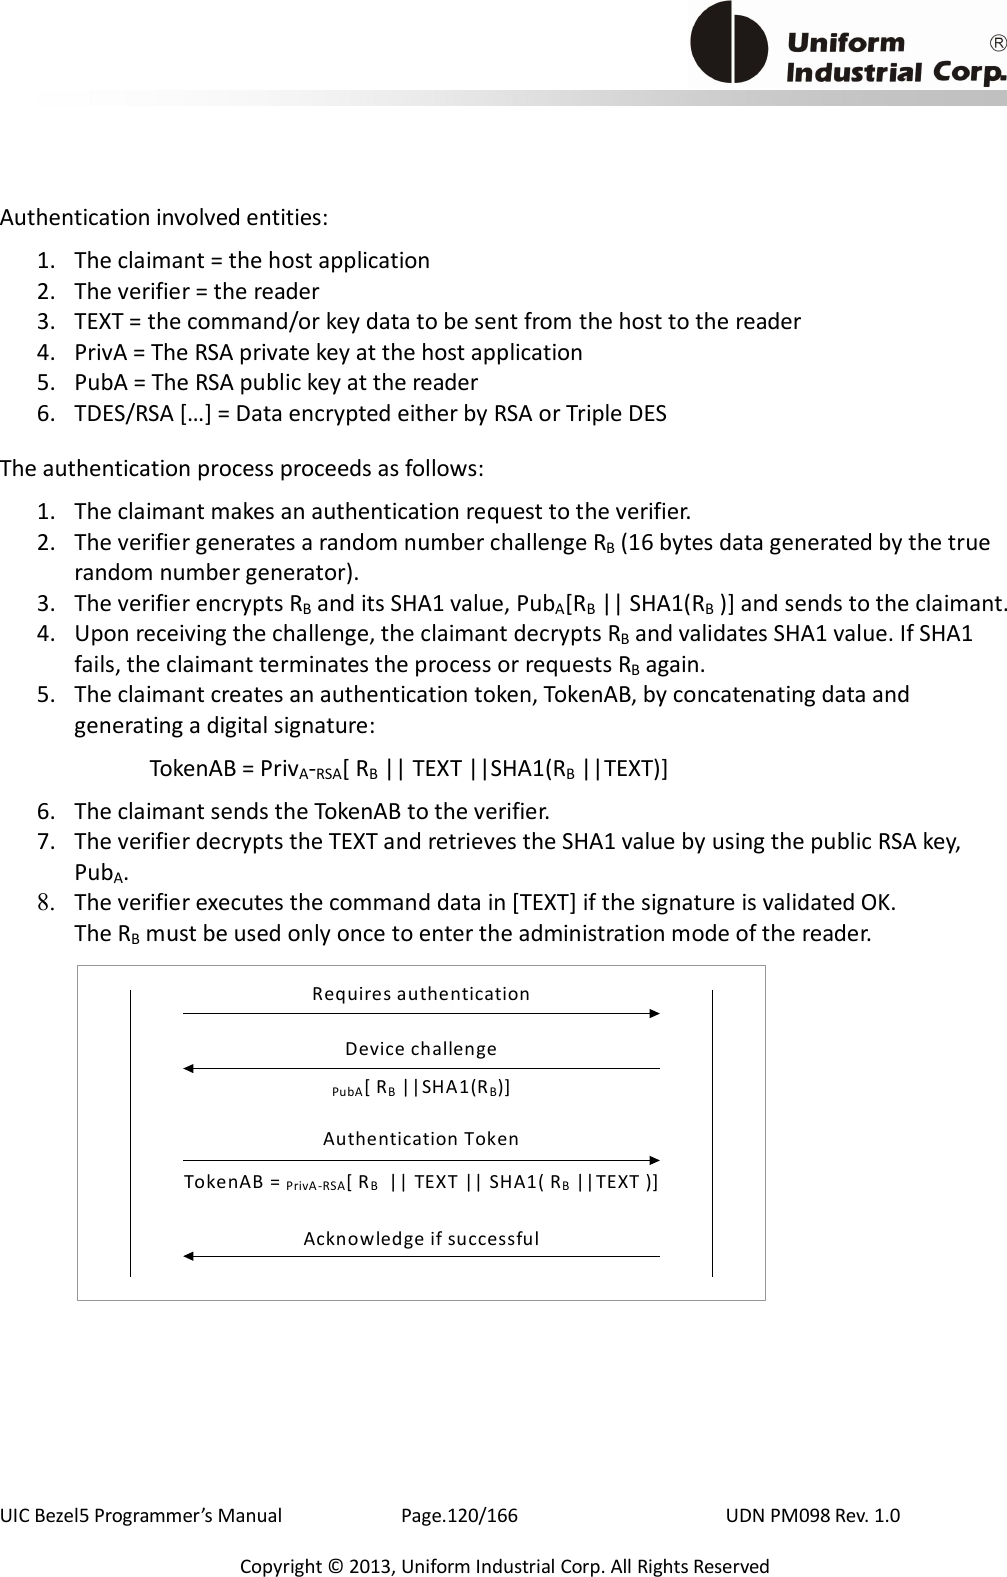                                           UIC Bezel5 Programmer’s Manual      Page.120/166                    UDN PM098 Rev. 1.0 Copyright © 2013, Uniform Industrial Corp. All Rights Reserved Authentication involved entities: 1. The claimant = the host application 2. The verifier = the reader 3. TEXT = the command/or key data to be sent from the host to the reader 4. PrivA = The RSA private key at the host application 5. PubA = The RSA public key at the reader 6. TDES/RSA […] = Data encrypted either by RSA or Triple DES The authentication process proceeds as follows:   1. The claimant makes an authentication request to the verifier. 2. The verifier generates a random number challenge RB (16 bytes data generated by the true random number generator). 3. The verifier encrypts RB and its SHA1 value, PubA[RB || SHA1(RB )] and sends to the claimant. 4. Upon receiving the challenge, the claimant decrypts RB and validates SHA1 value. If SHA1 fails, the claimant terminates the process or requests RB again.     5. The claimant creates an authentication token, TokenAB, by concatenating data and generating a digital signature: TokenAB = PrivA-RSA[ RB || TEXT ||SHA1(RB ||TEXT)] 6. The claimant sends the TokenAB to the verifier.   7. The verifier decrypts the TEXT and retrieves the SHA1 value by using the public RSA key, PubA. 8. The verifier executes the command data in [TEXT] if the signature is validated OK. The RB must be used only once to enter the administration mode of the reader. Device challengePubA[ RB ||SHA1(RB)]Authentication TokenTokenAB = PrivA-RSA[ RB  || TEXT || SHA1( RB ||TEXT )]Acknowledge if successfulRequires authentication 